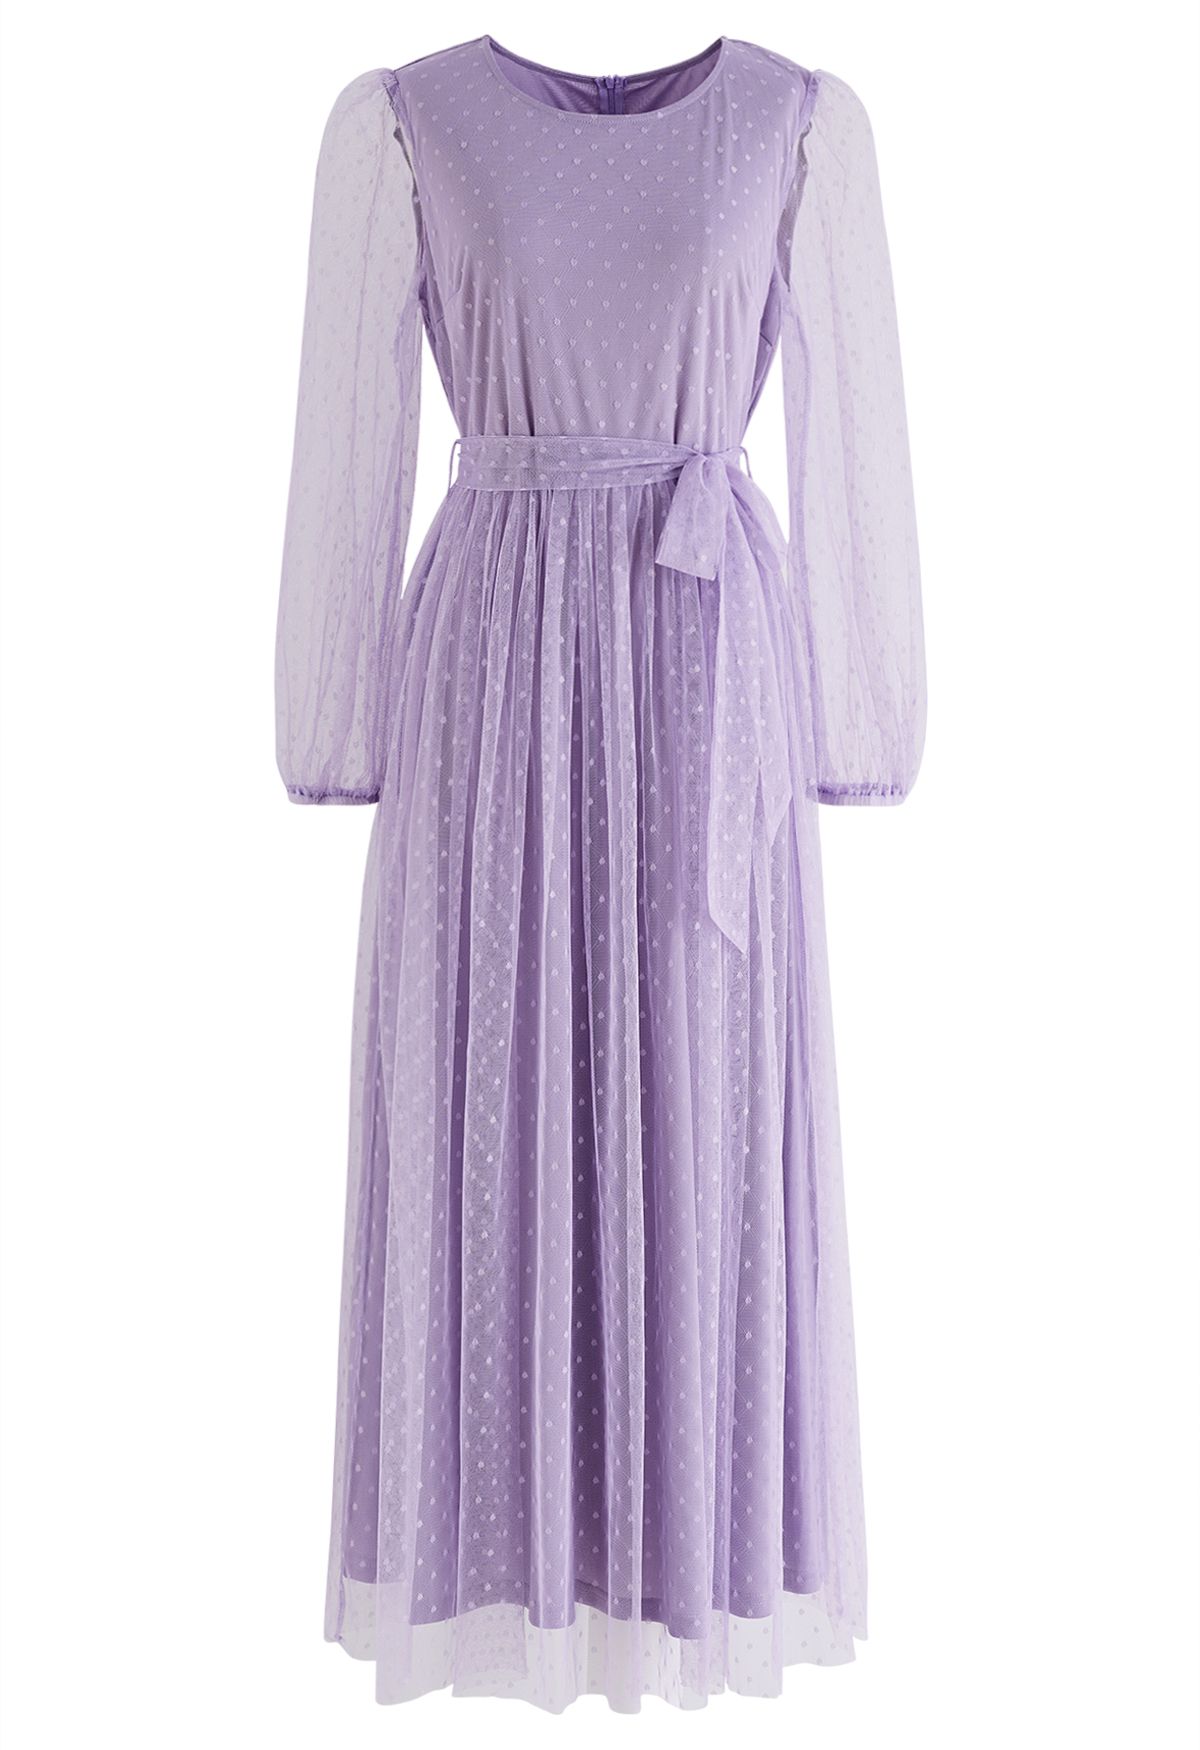 Lovely Dotted Mesh Maxi Dress in Lilac - Retro, Indie and Unique Fashion